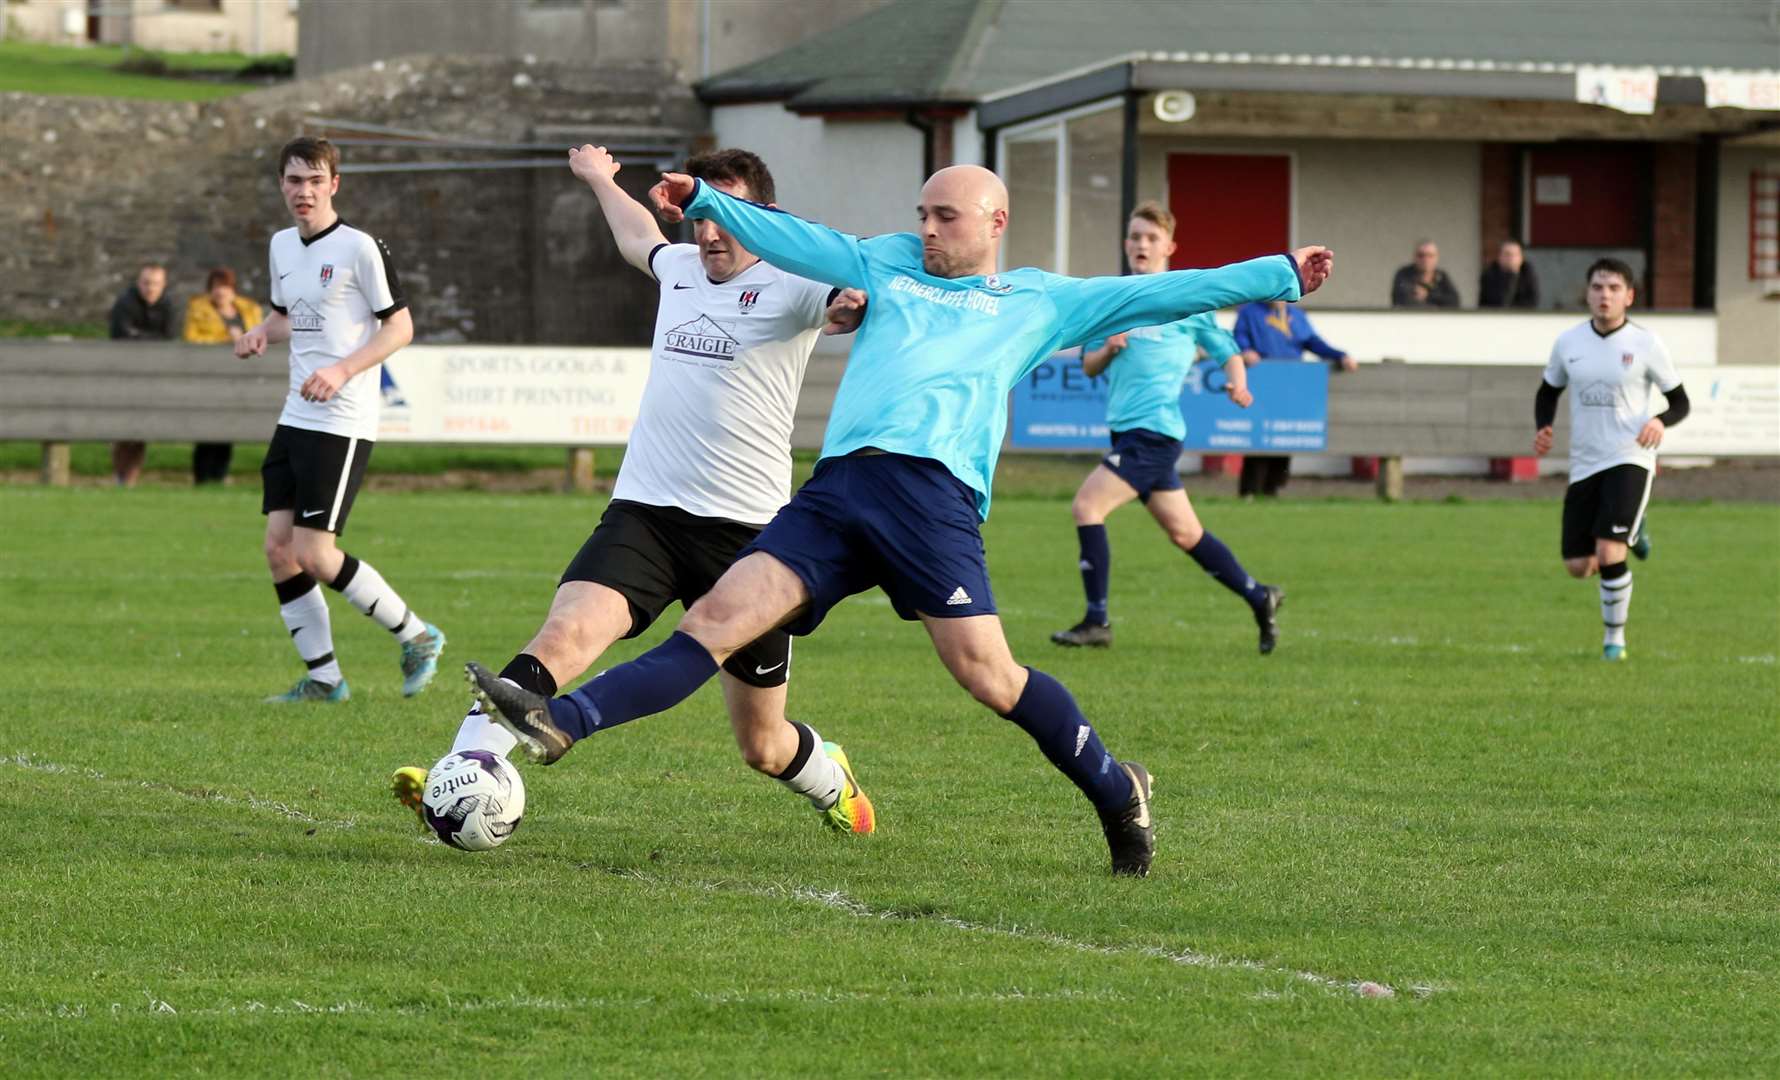 Thurso Swifts and Wick Groats met earlier in the season but the match that was scheduled between the two was cancelled as Swifts failed to raise a starting eleven. It is the third time this season that Swifts have forfeited a fixture. Picture: James Gunn